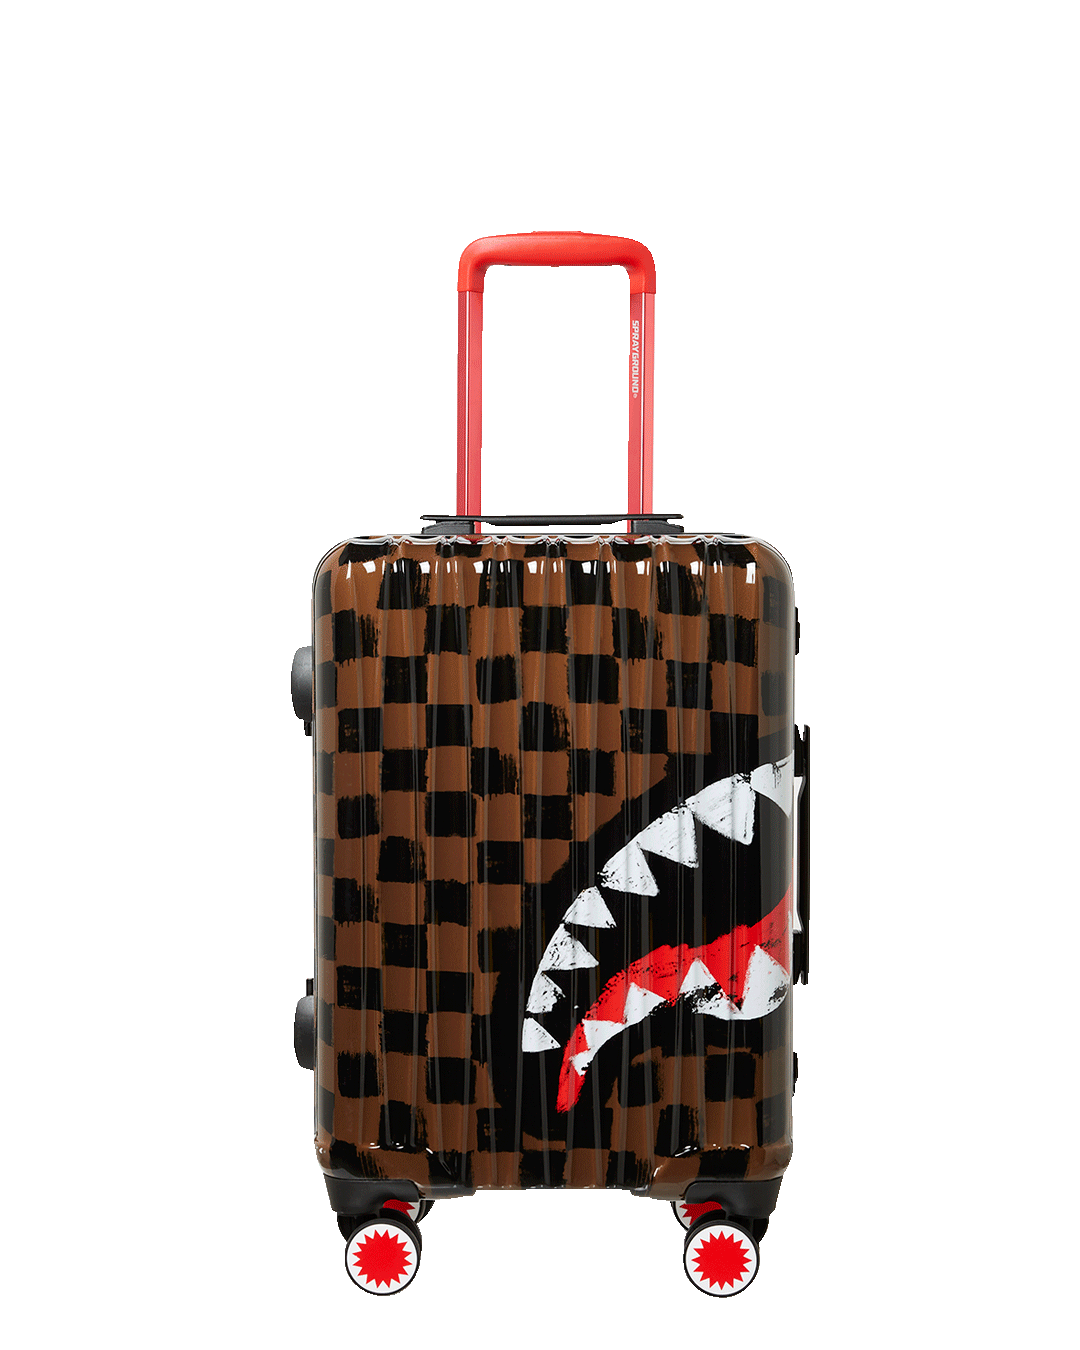 SHARKS IN PARIS PAINT CARRY-ON LUGGAGE